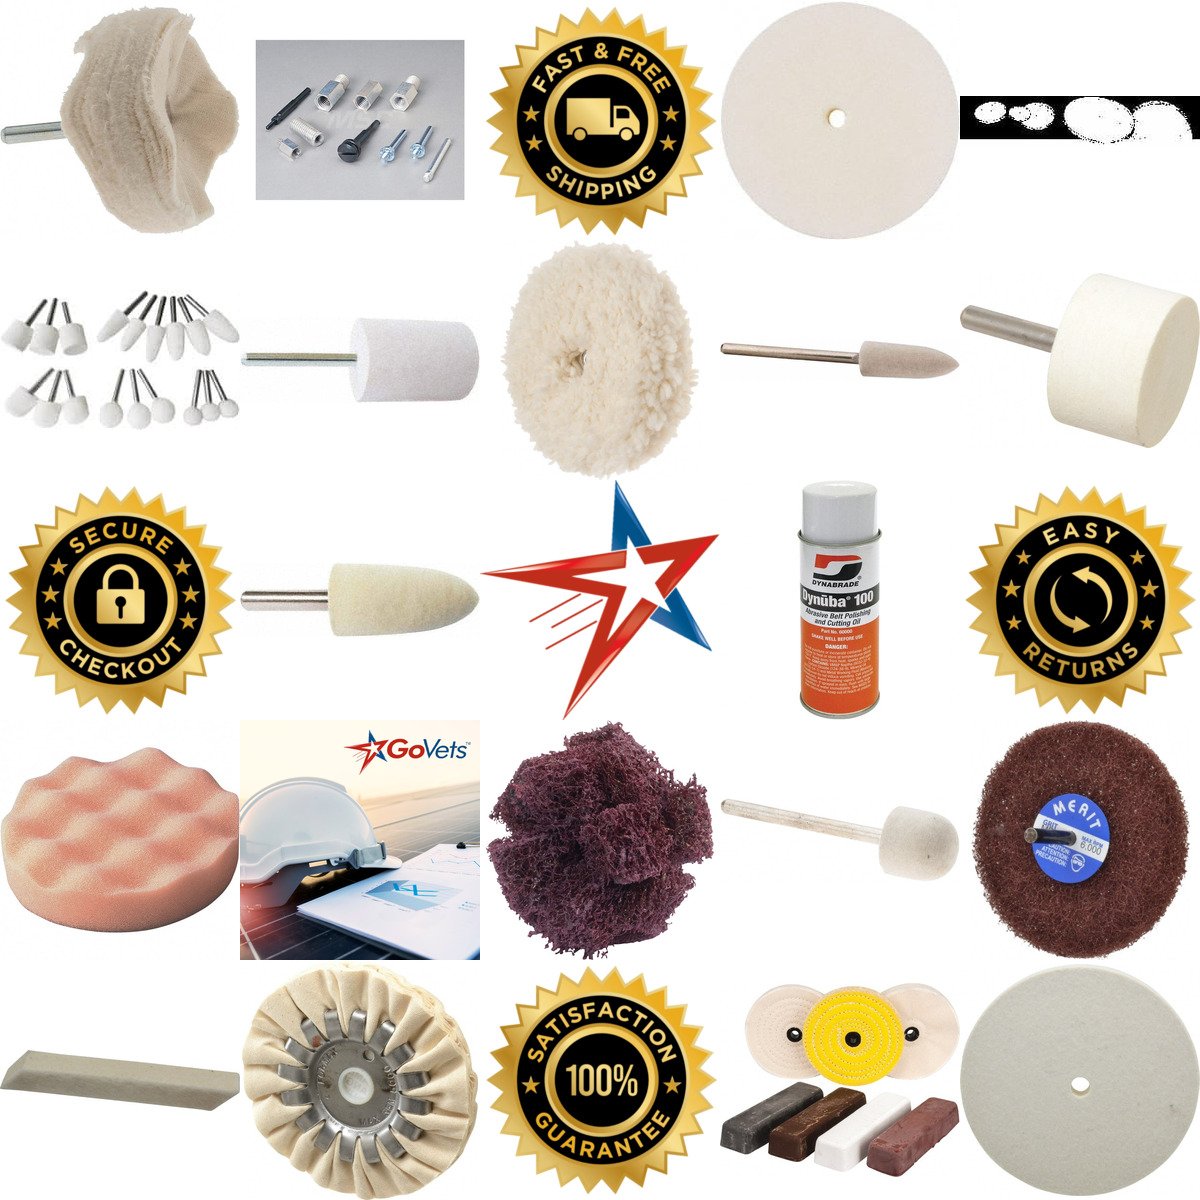 A selection of Buffing and Polishing products on GoVets